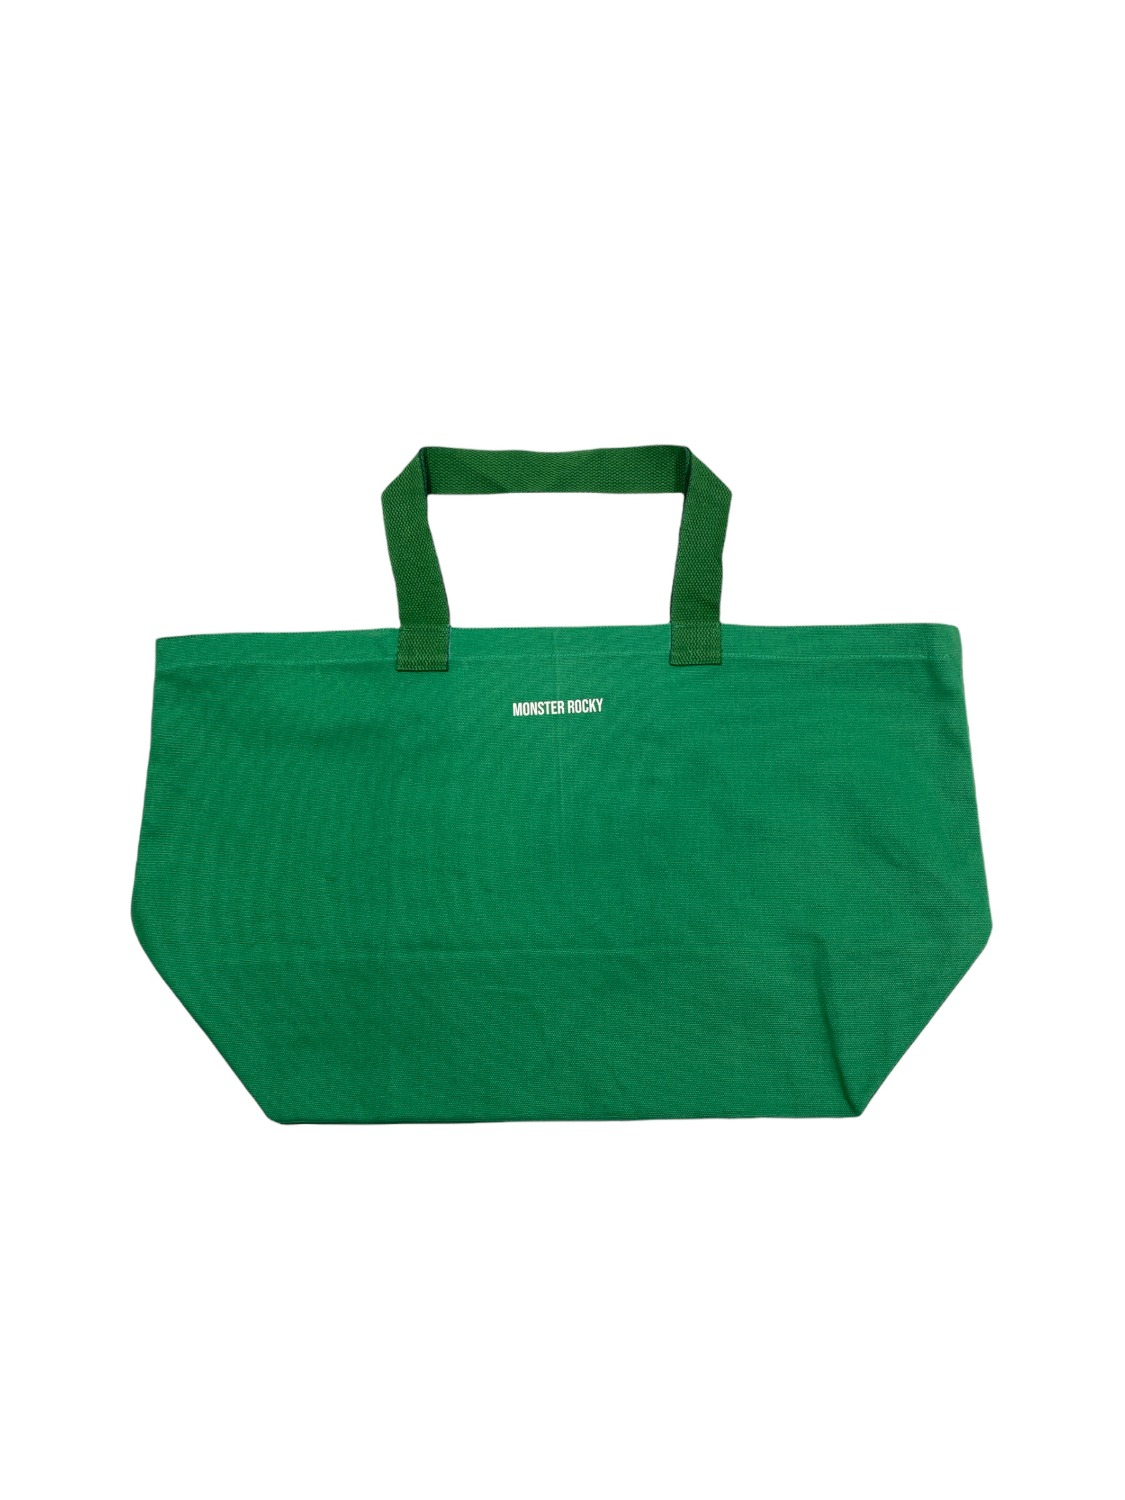 Monster Rocky Tote Bag (L-GREEN)